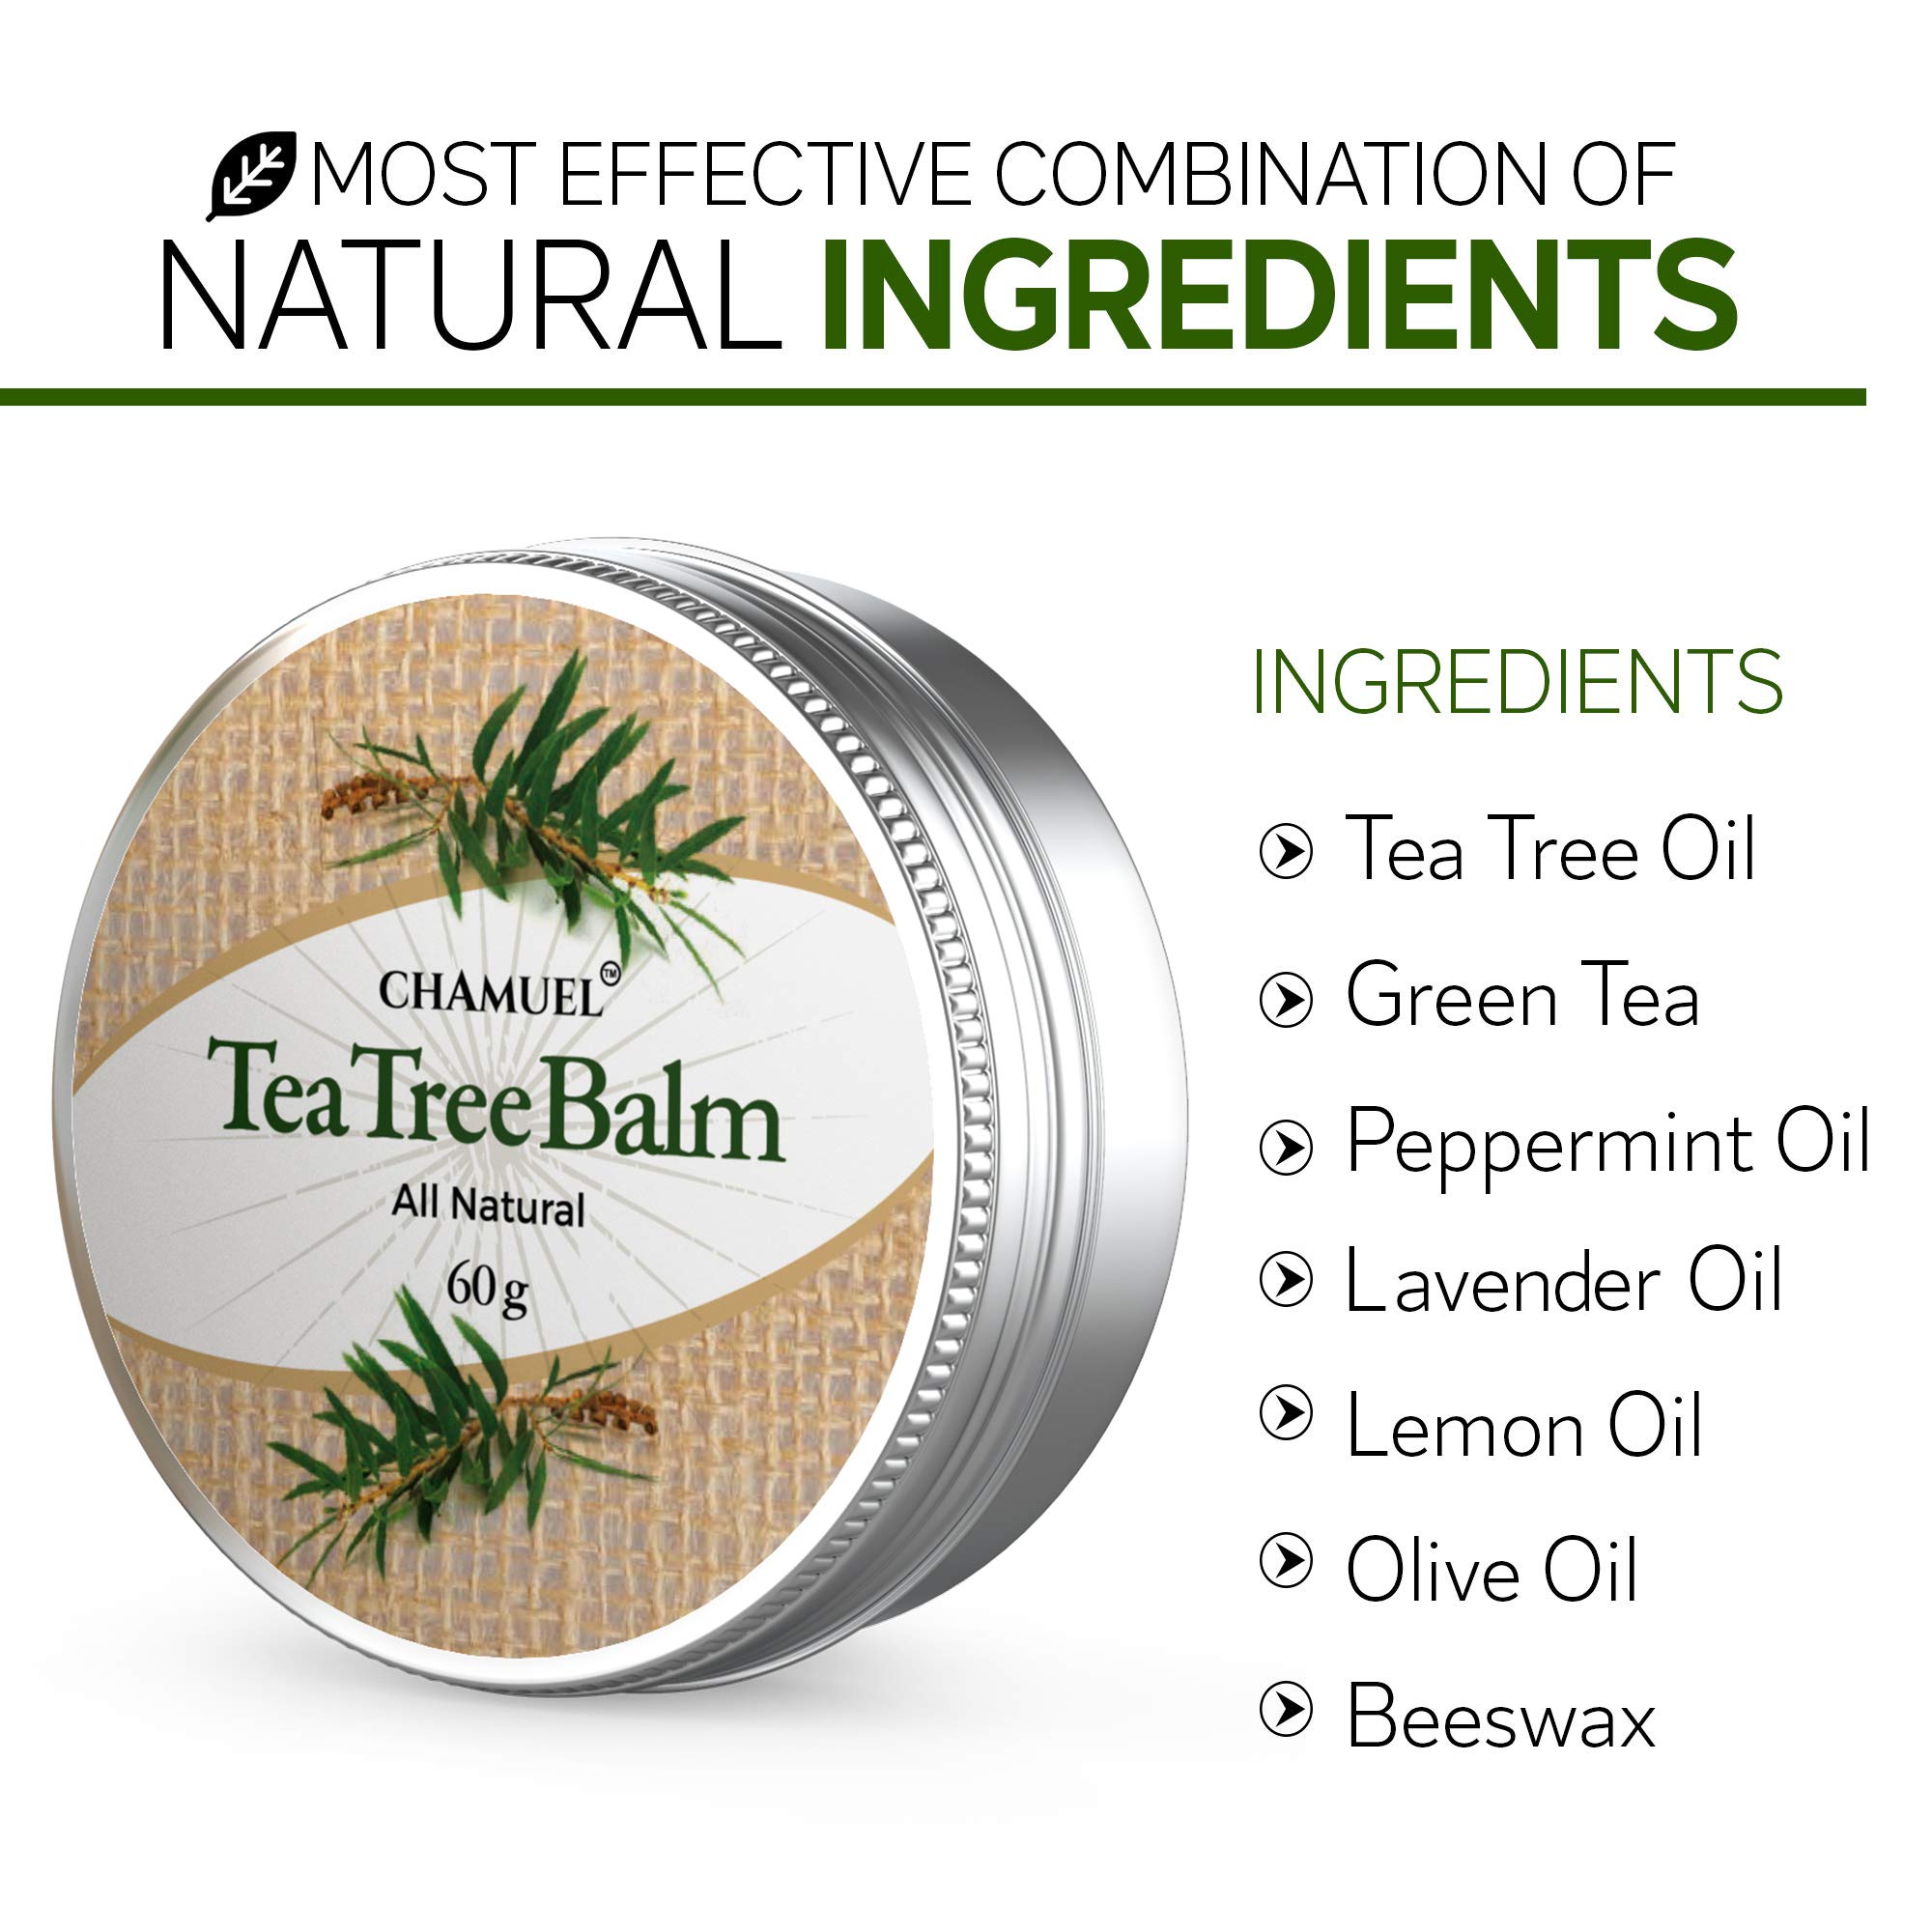 TEA TREE OIL BALM -100% All Natural | Great Cream for Soothing Irritations like Eczema, Psoriasis, Rashes, Insect Bites, Folliculitis, Acne, Itches, Dry Chapped Heels, Cuticles, Saddle Sores and more!